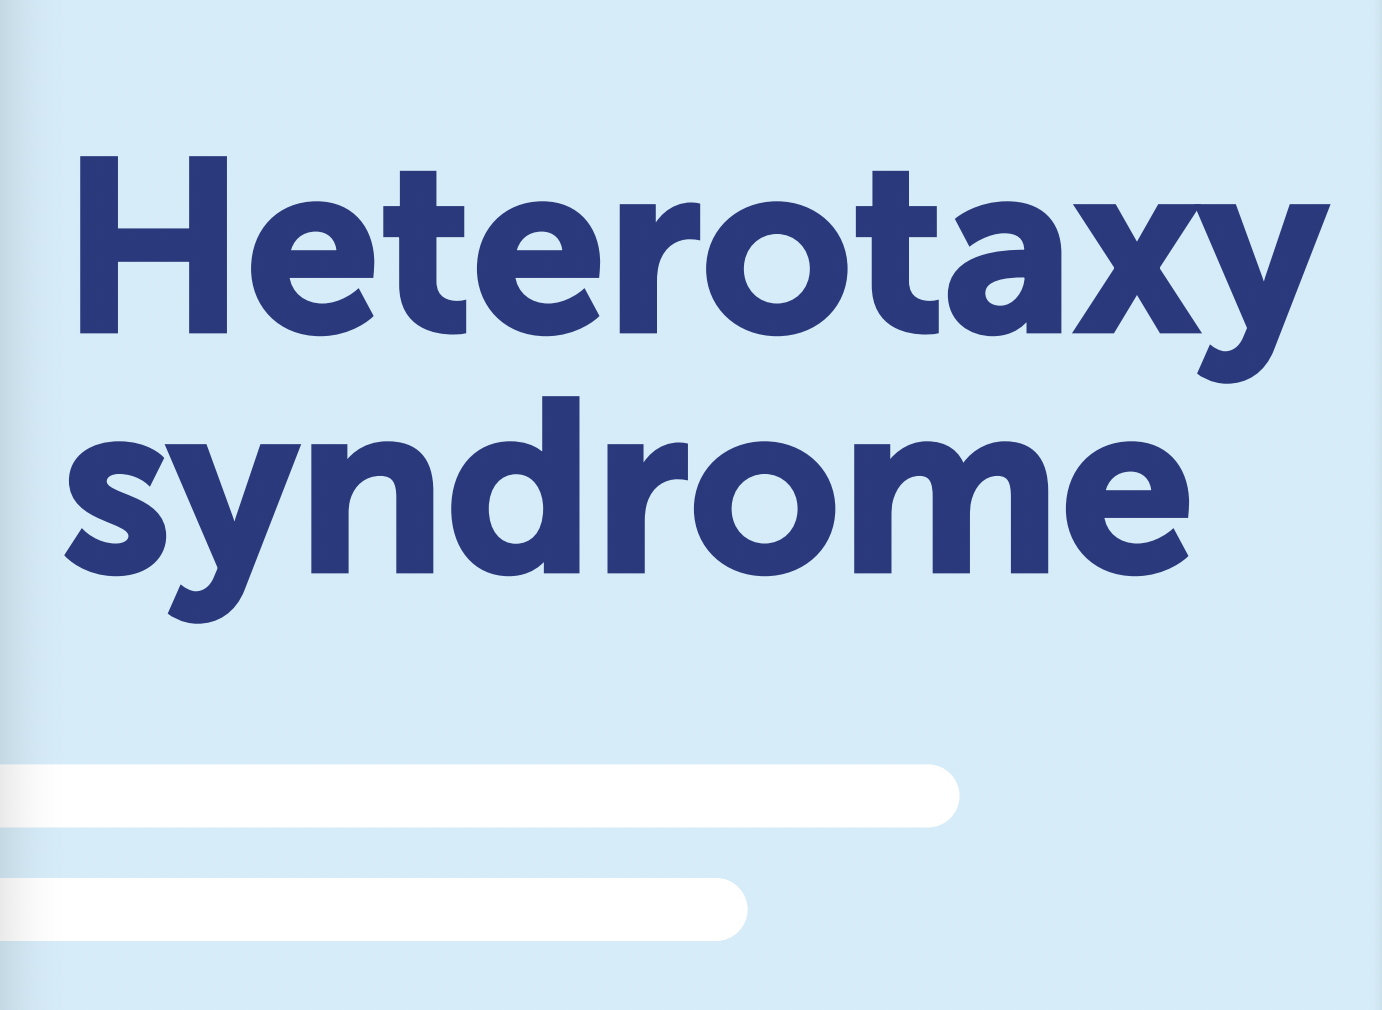 Graphic with the words "heterotaxy syndrome"